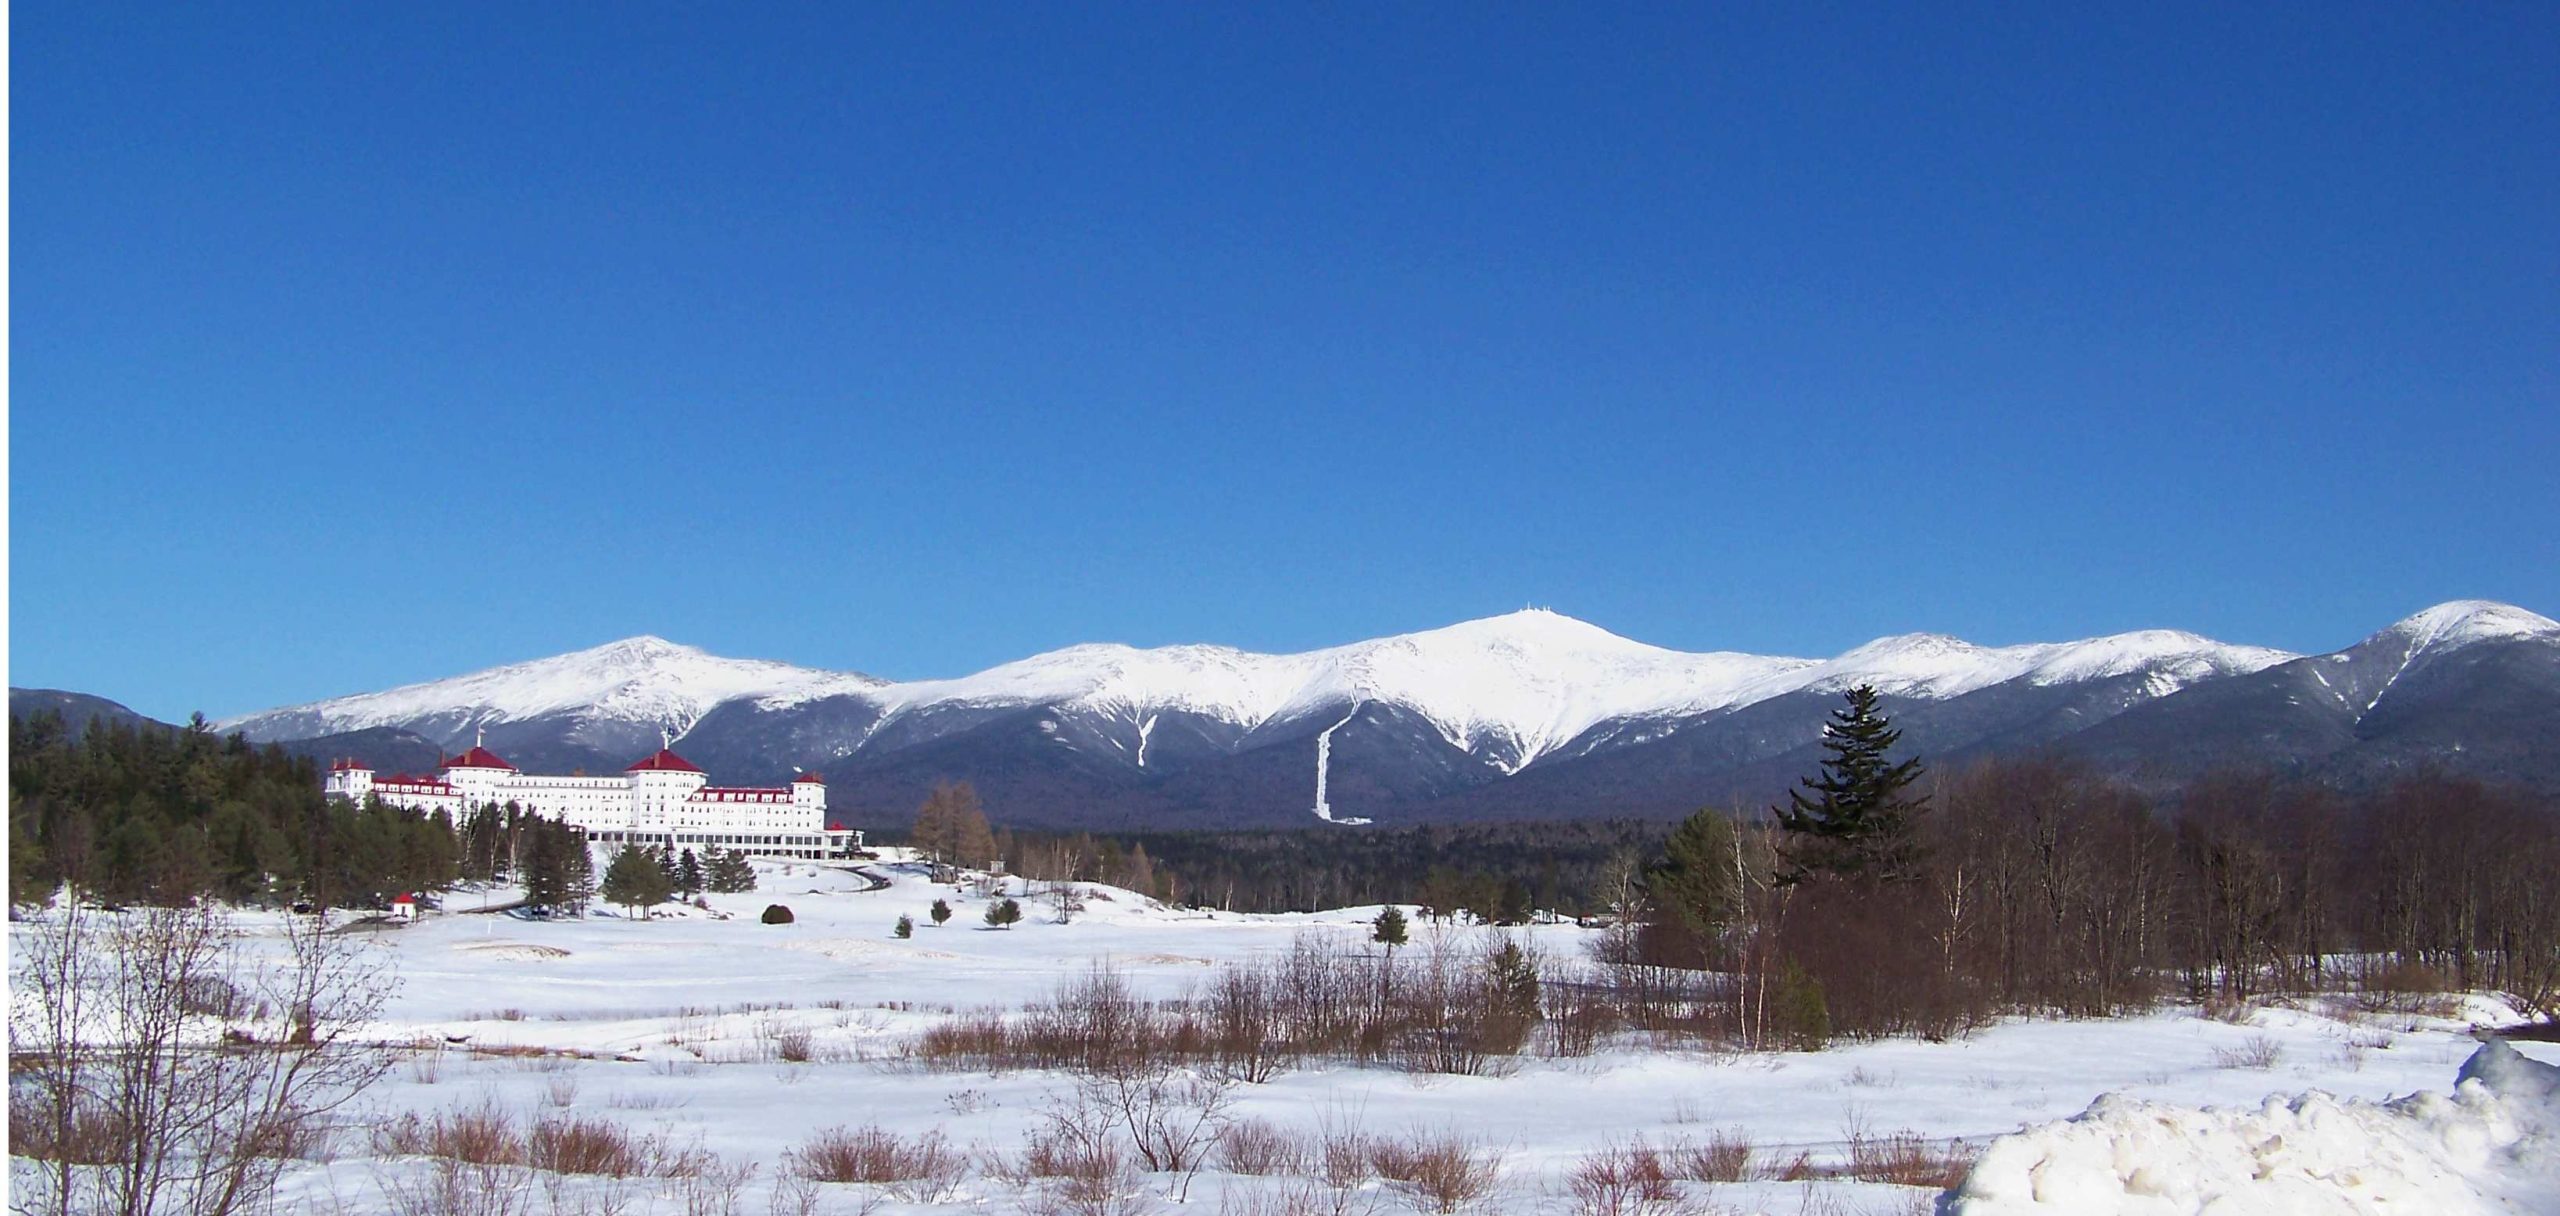 Mount Washington You Have To See (user submitted)